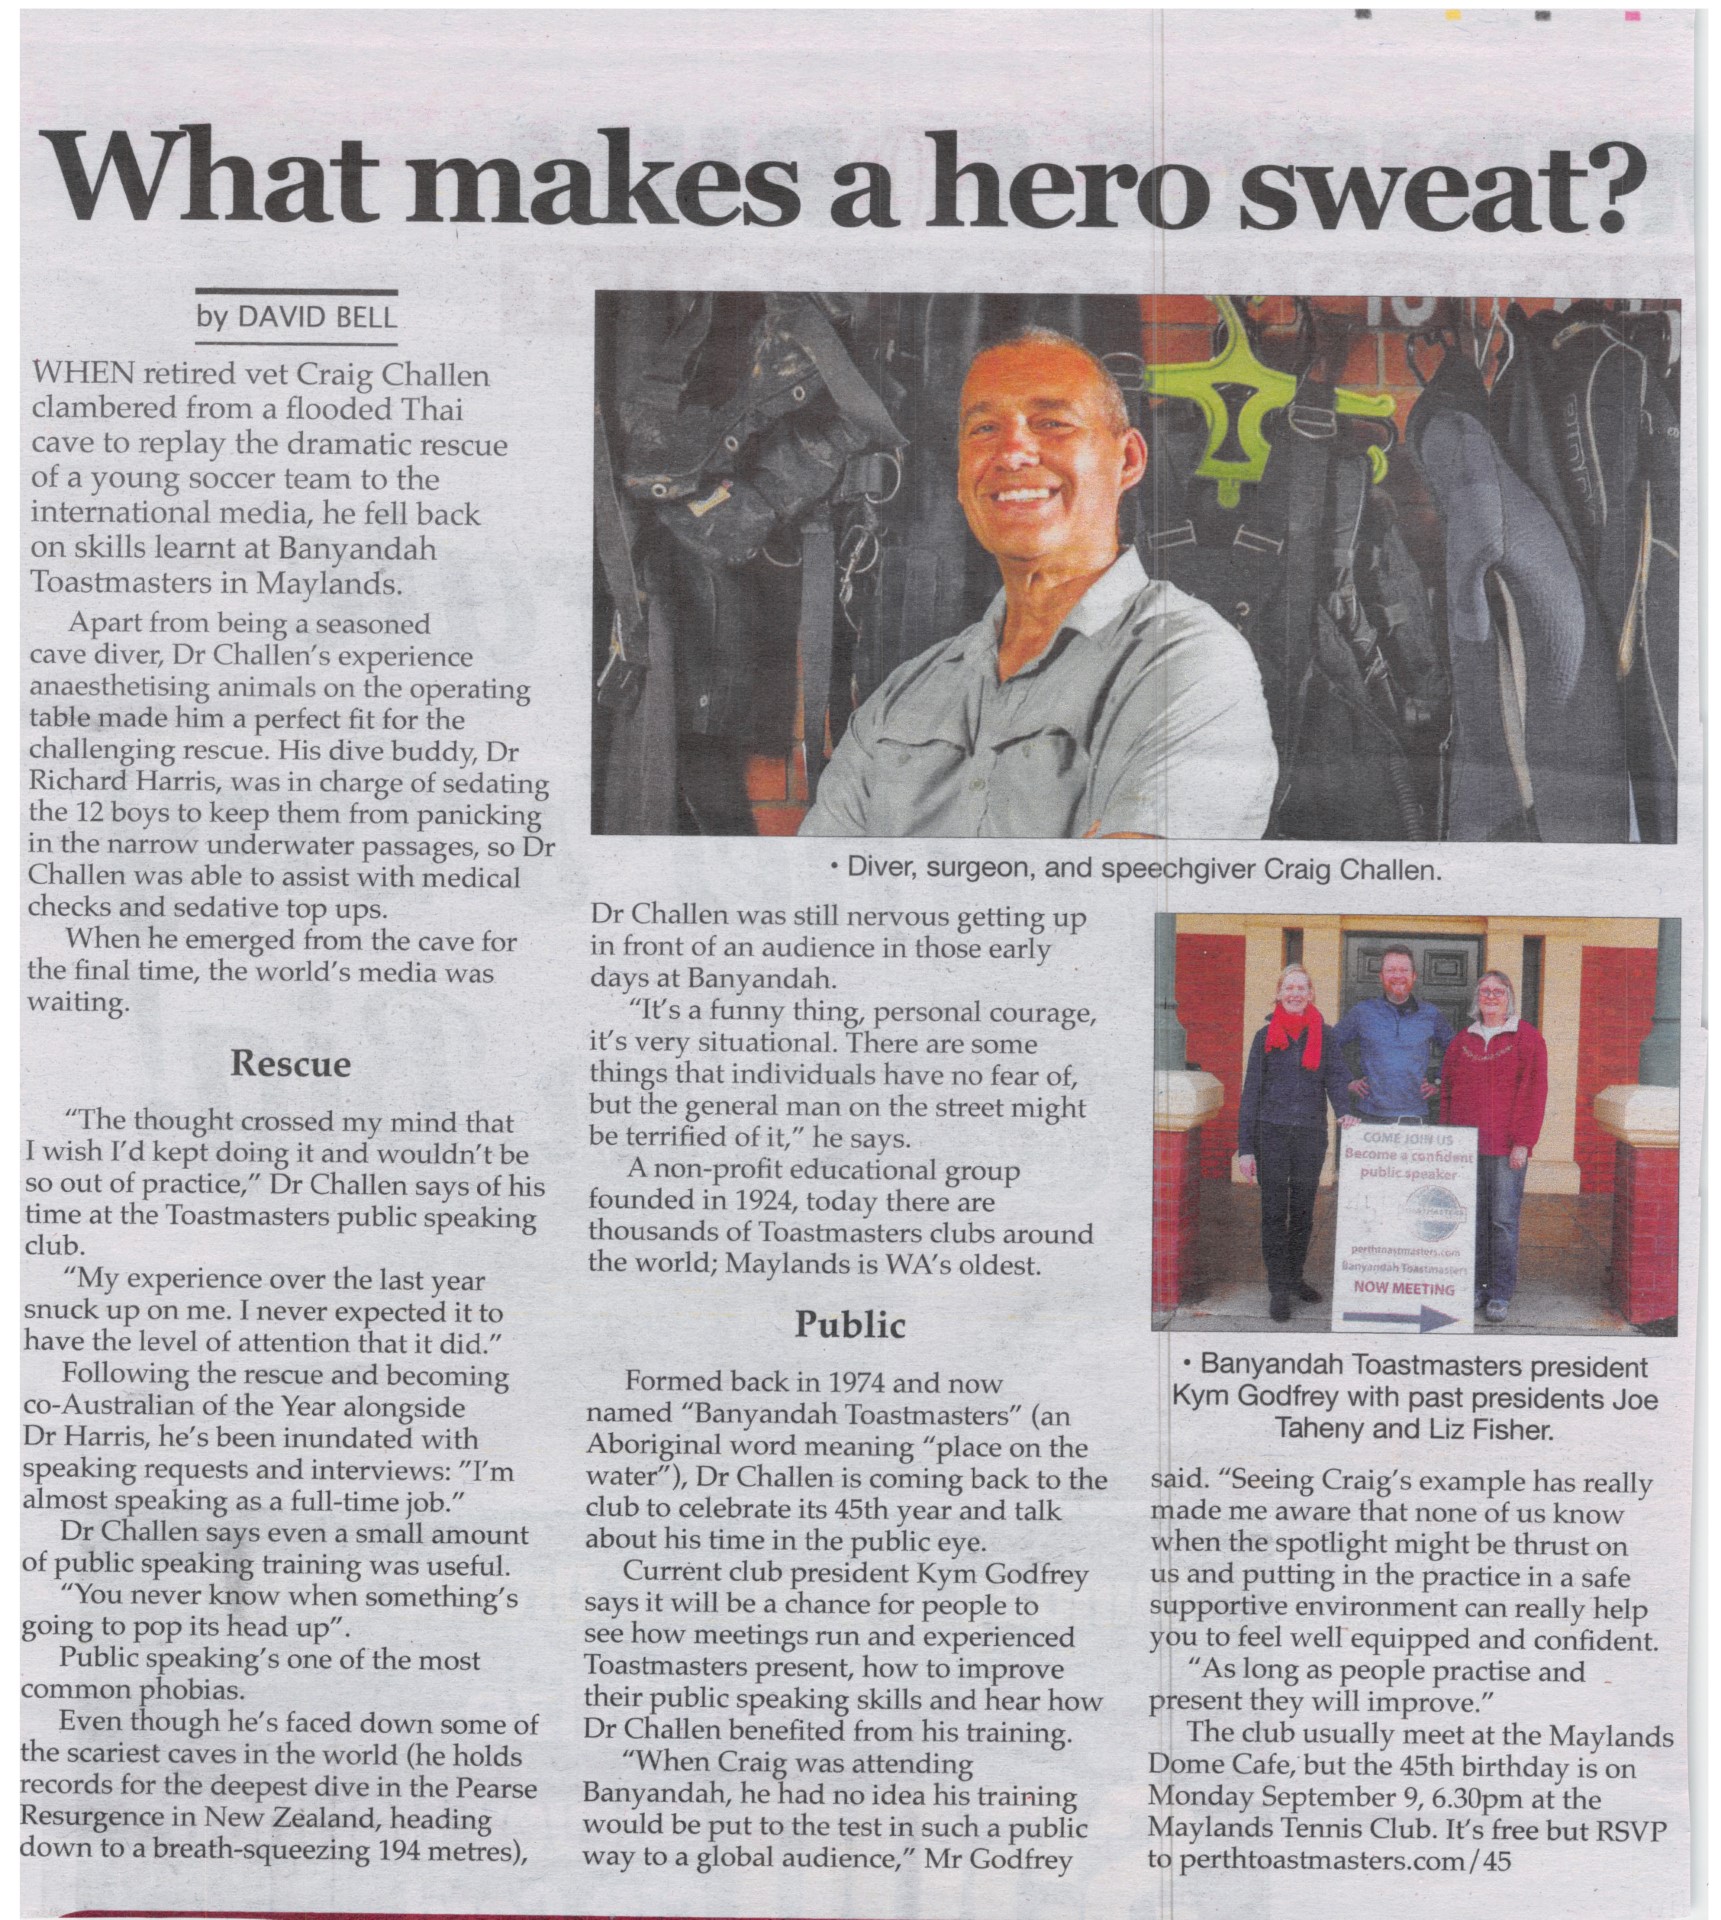 What Makes a Hero Sweat - Perth Voice Newspaper Article about Craig Challen and Banyandah Toastmasters' 45th Celebrations